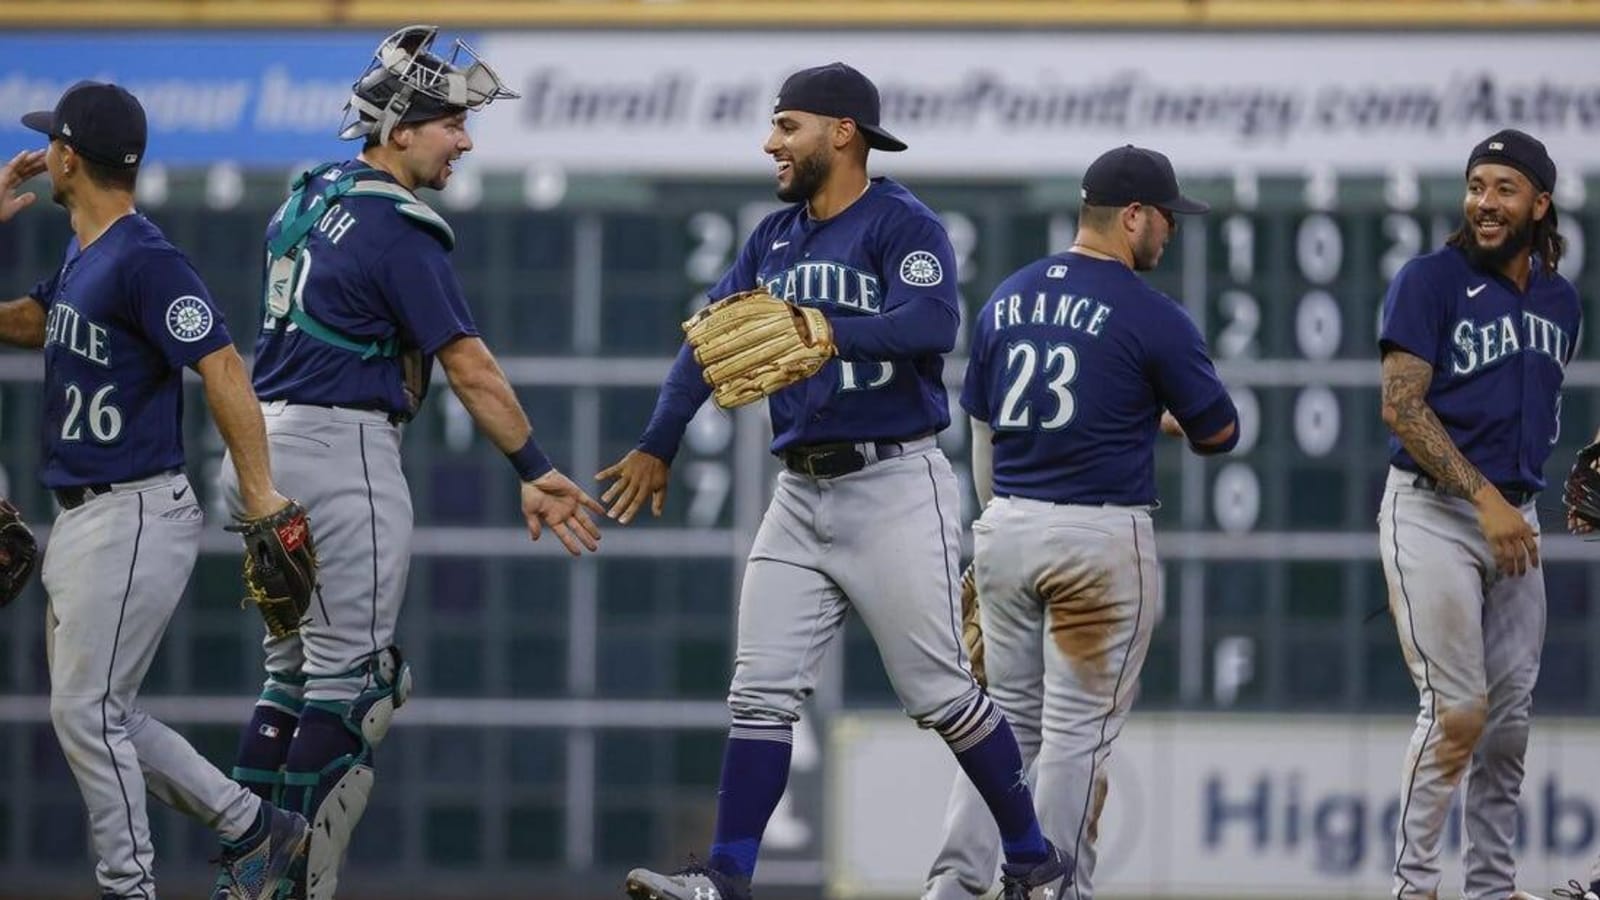 MLB roundup: Mariners rally late, end losing streak to Astros